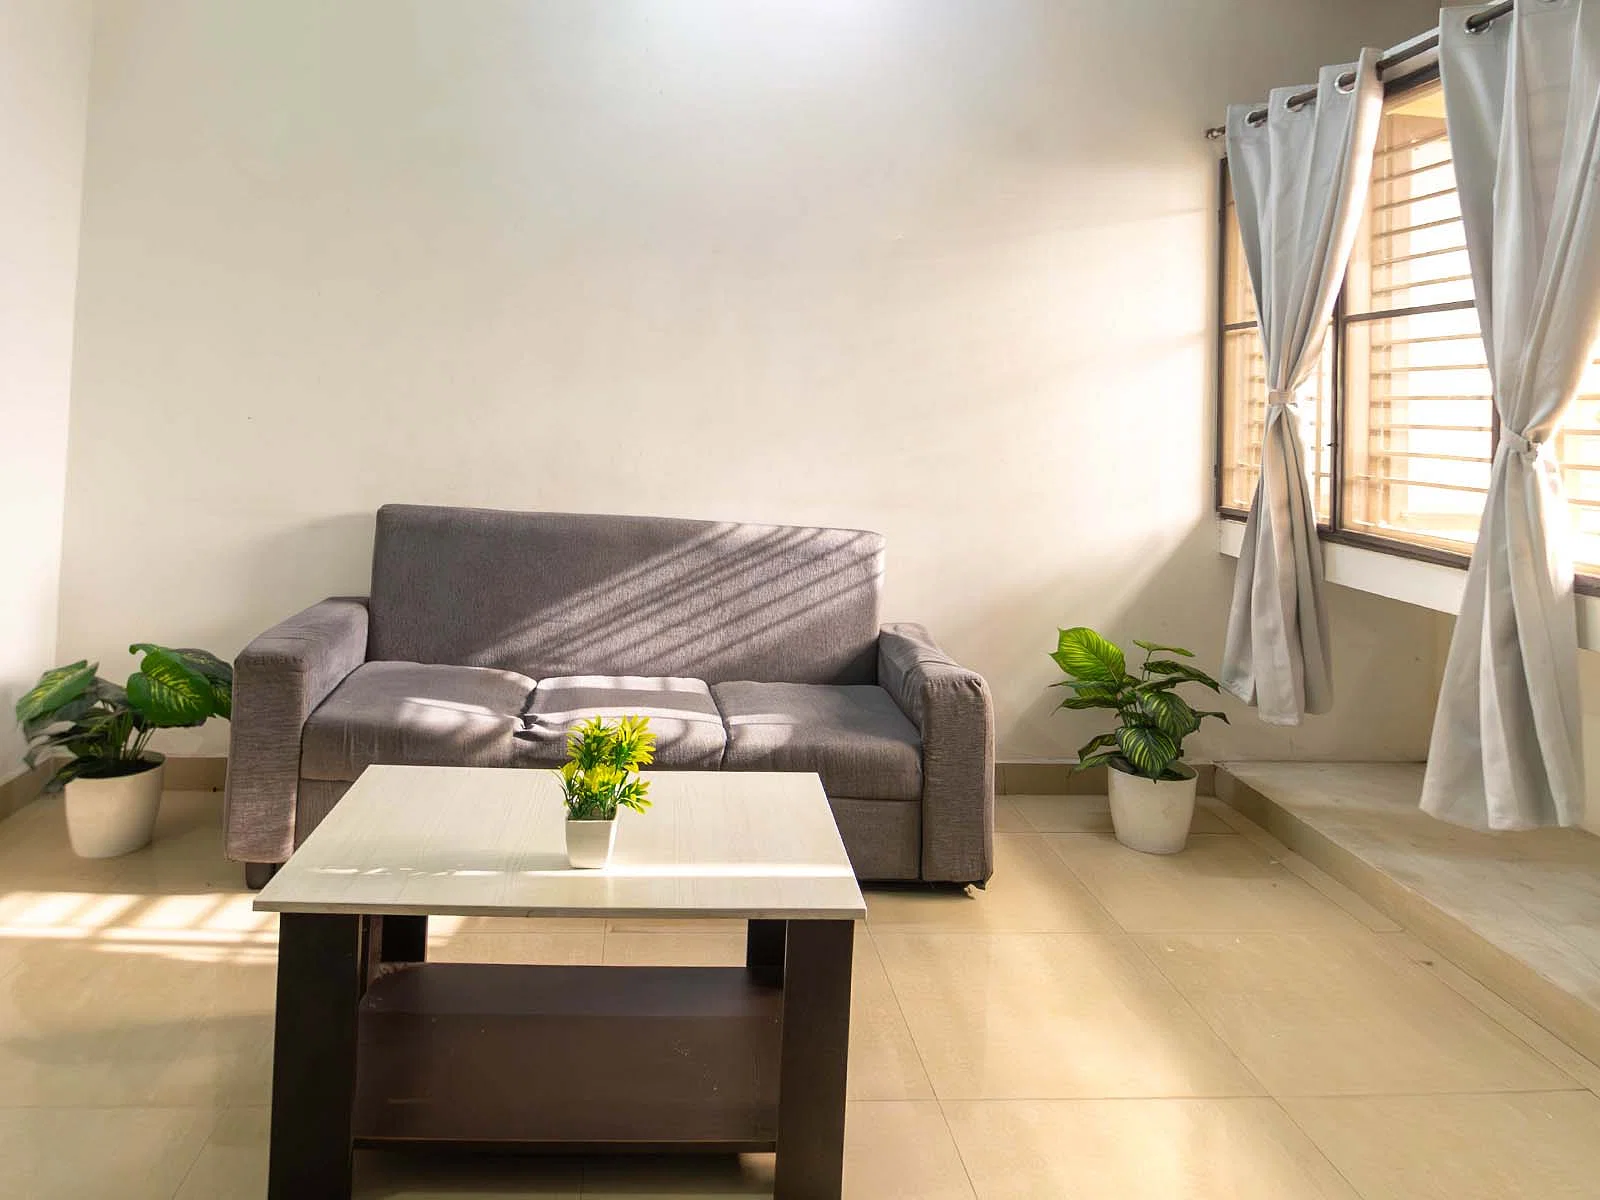 best unisex PGs in prime locations of Chennai with all amenities-book now-Zolo Italia